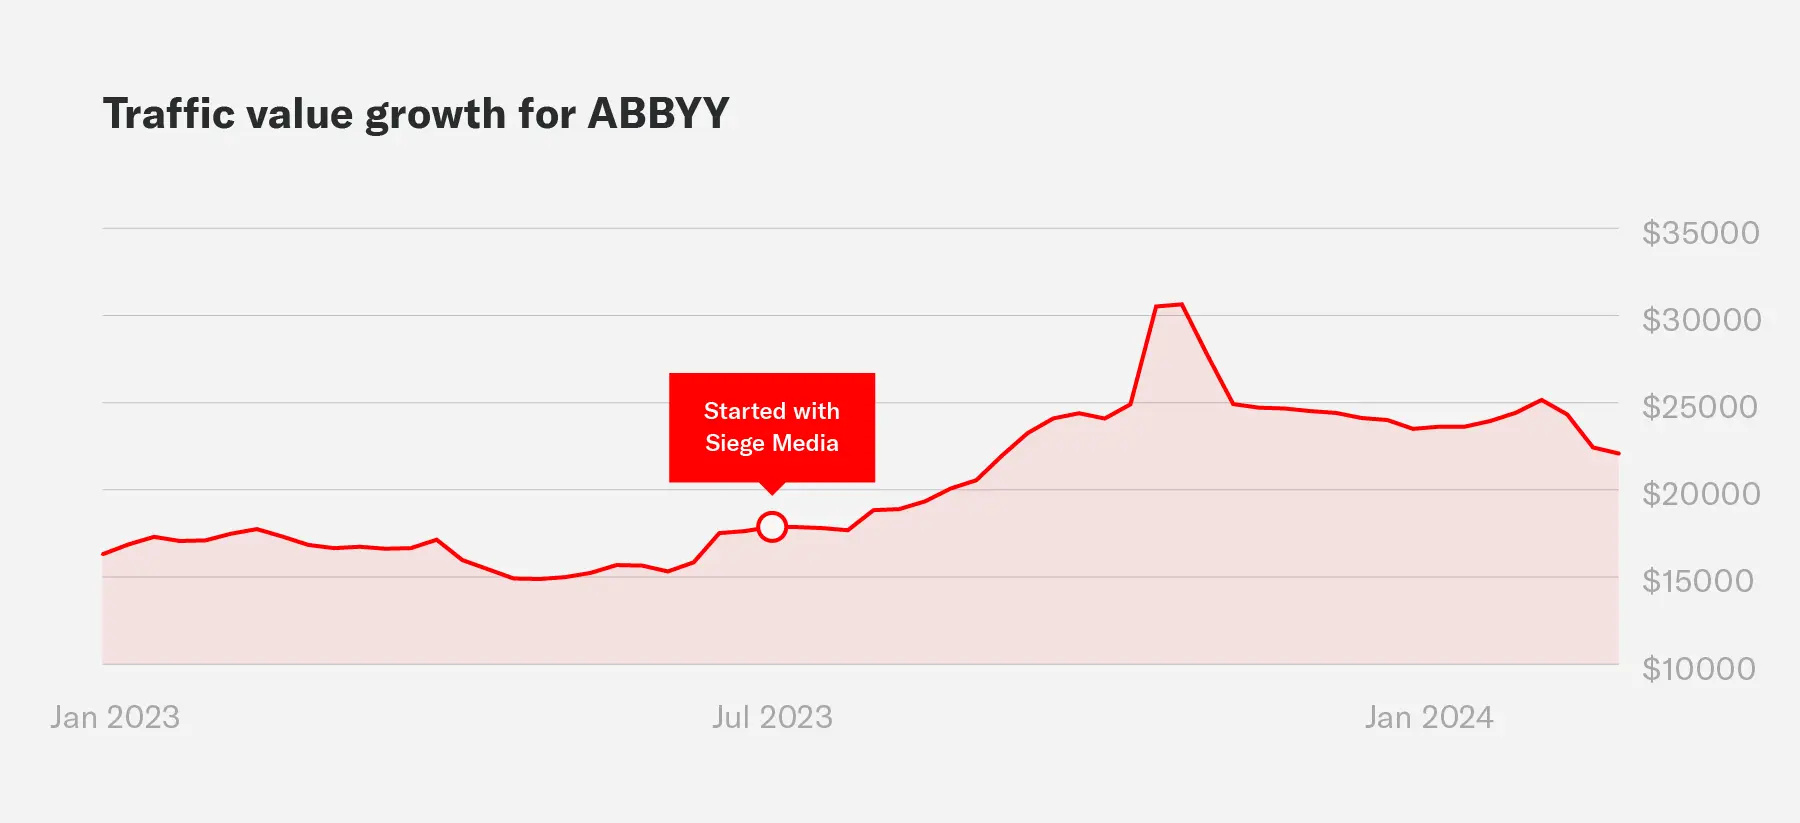 A graph showing the traffic value growth for ABBYY during an engagement with Siege Media